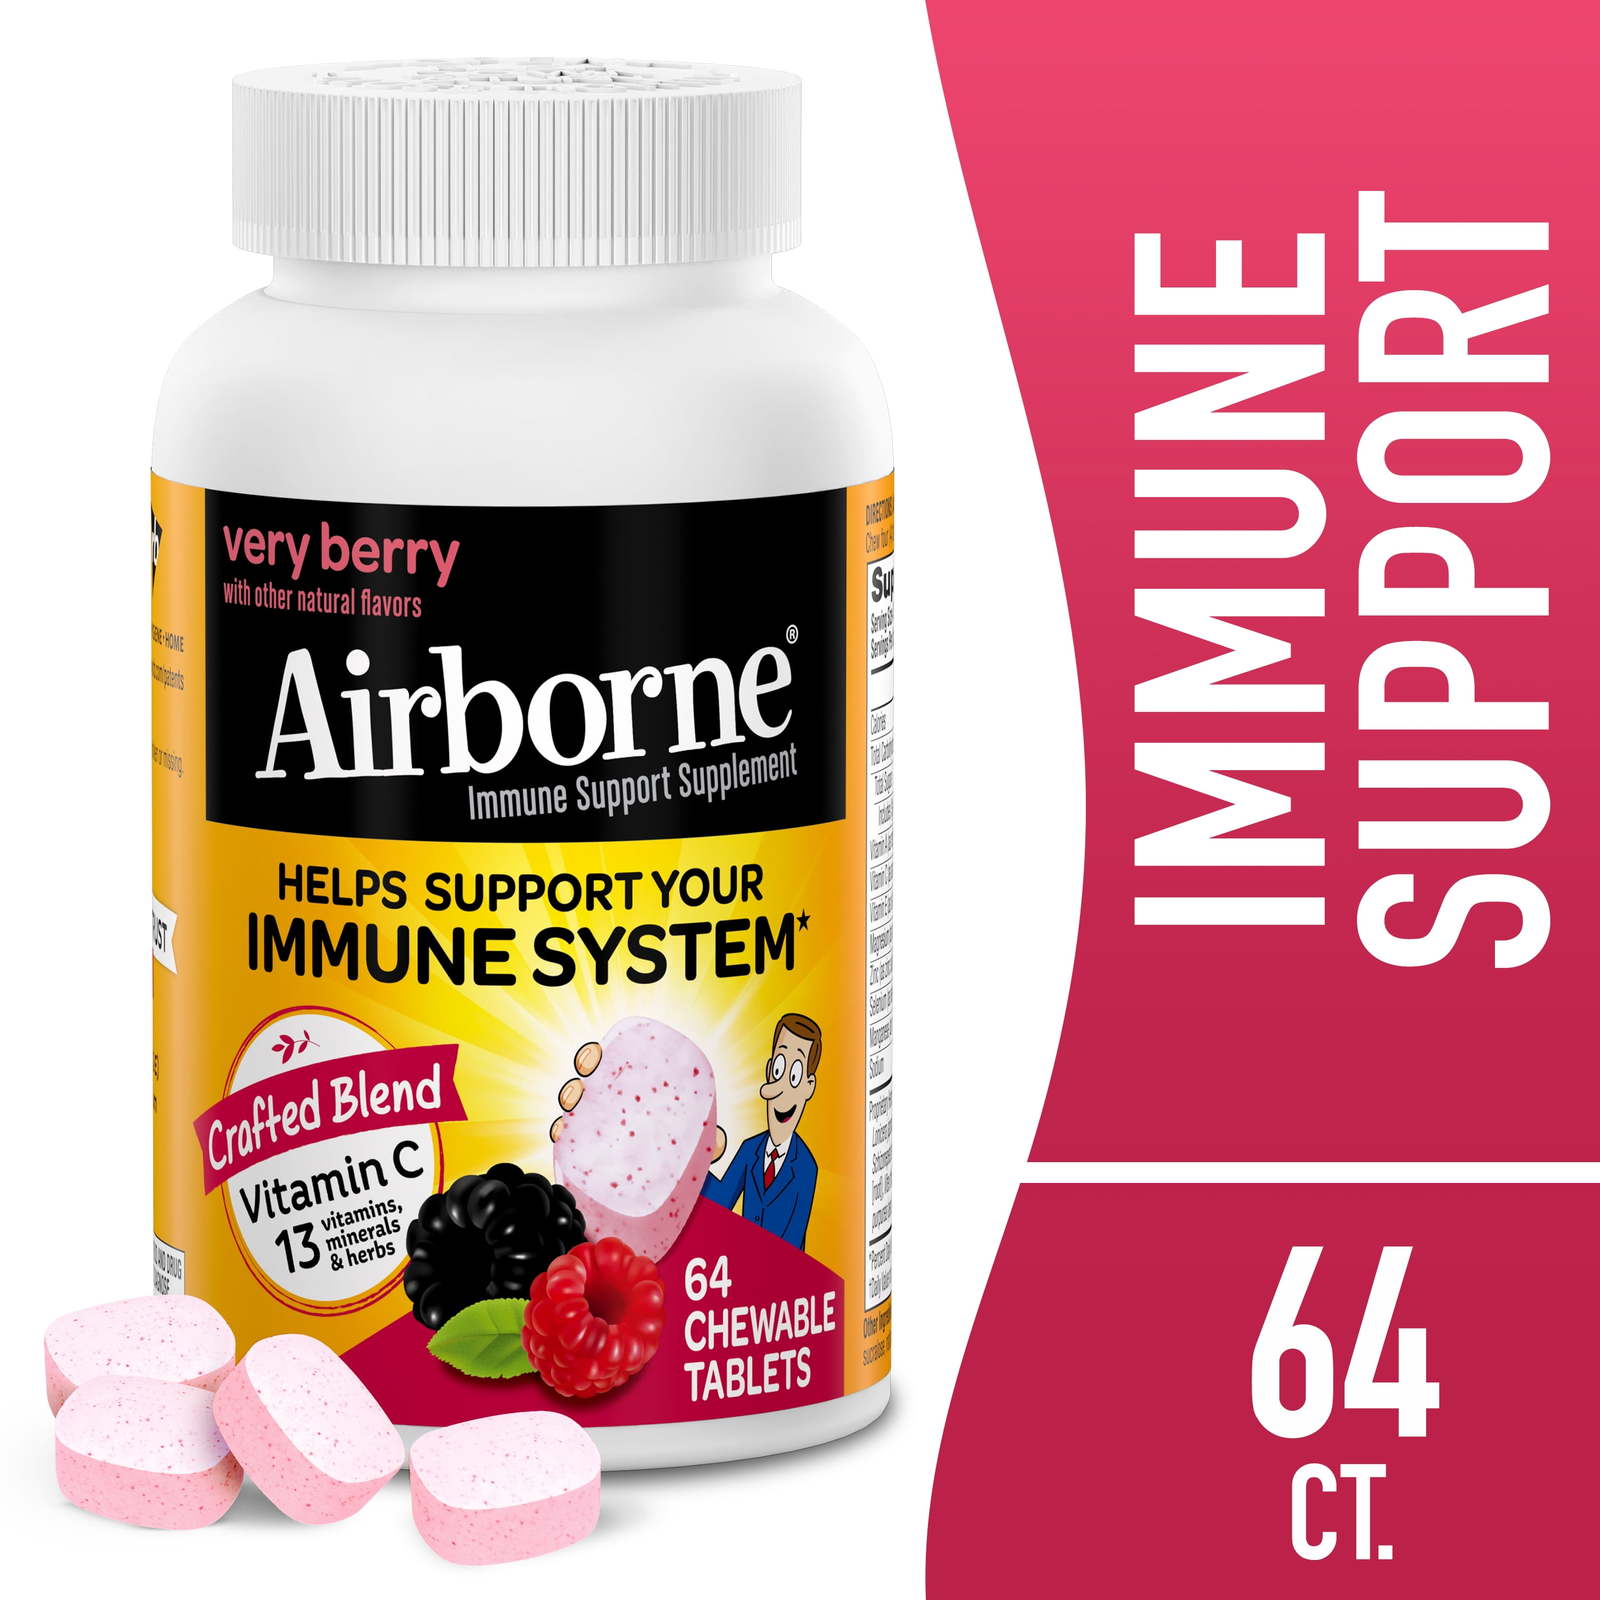 Airborne Very Berry Chewable Tablets 64 count - 1000mg of Vitamin C - Immune ... - $13.29